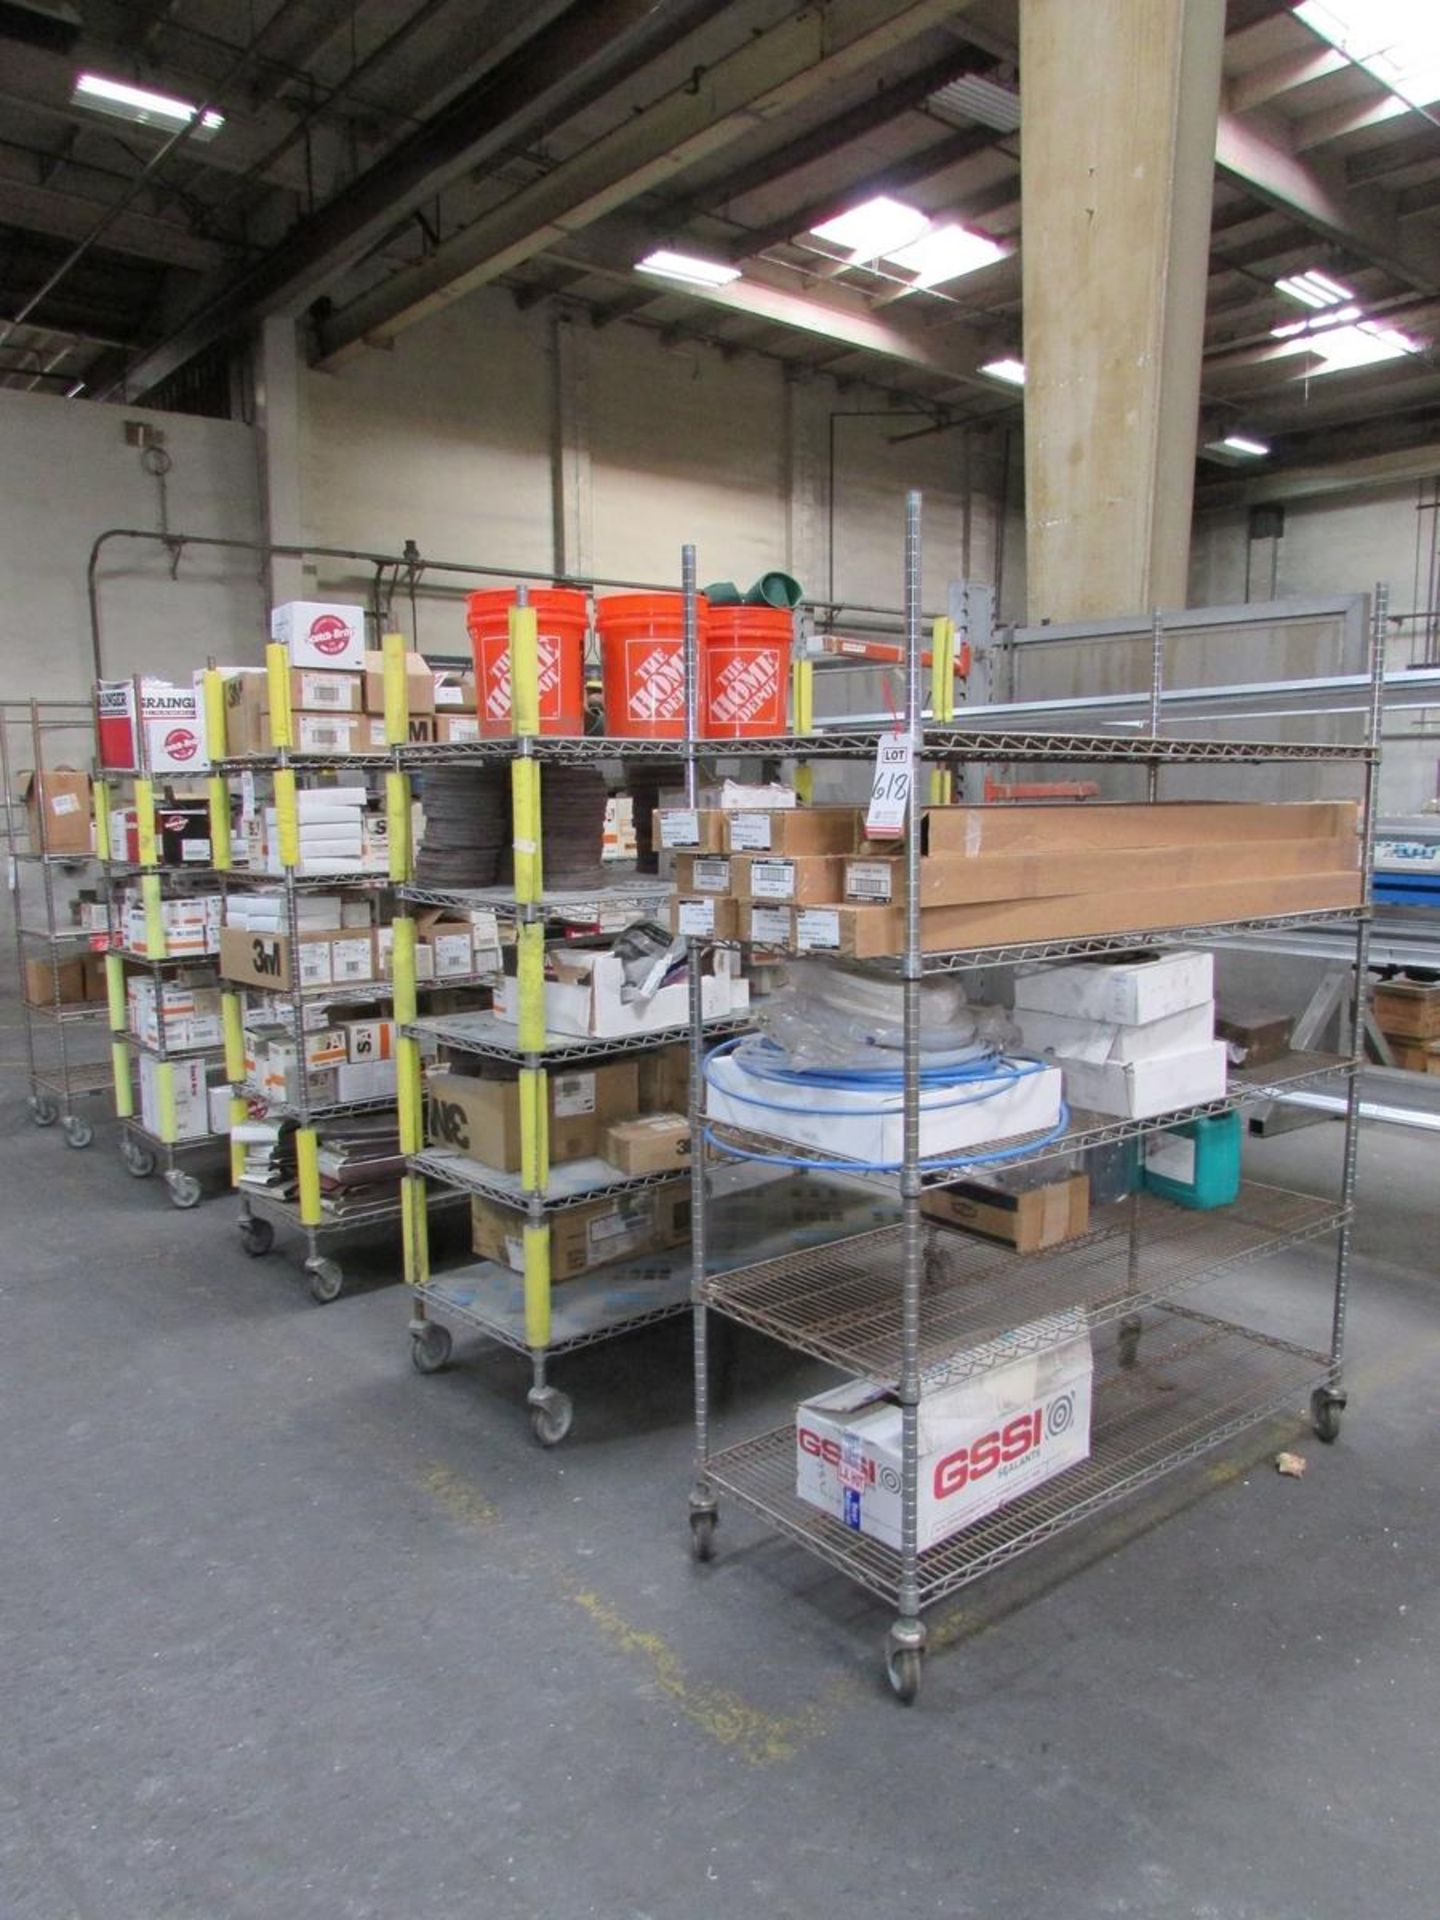 LOT - (5) NEXEL ROLLING WIRE RACKS, W/ CONTENTS: LARGE ASSORTMENT OF ABRASIVE CONSUMABLES